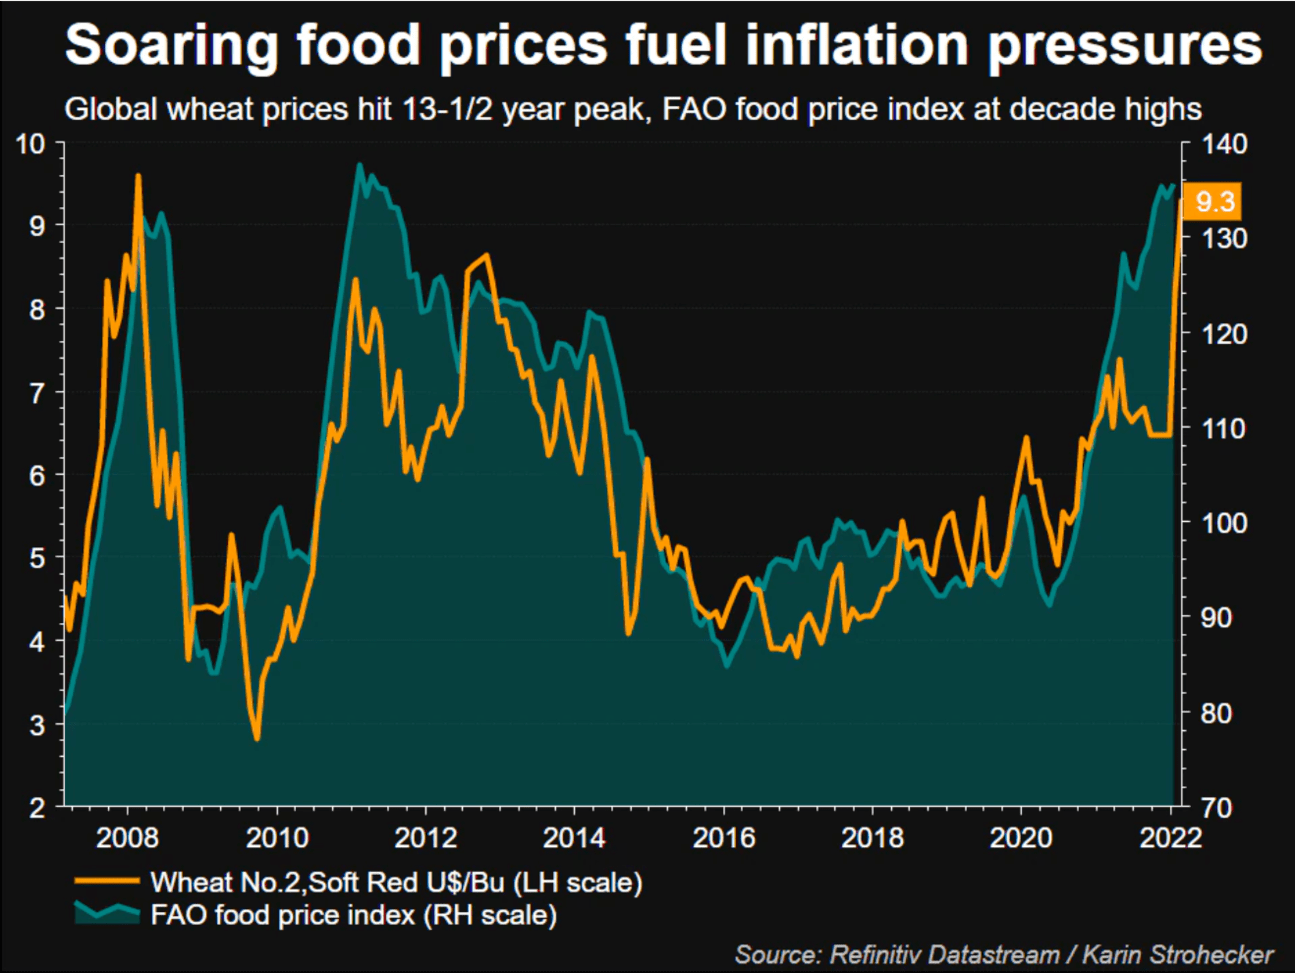 Soaring wheat prices hit a peak since the 2008 financial crisis, fuelling inflation.